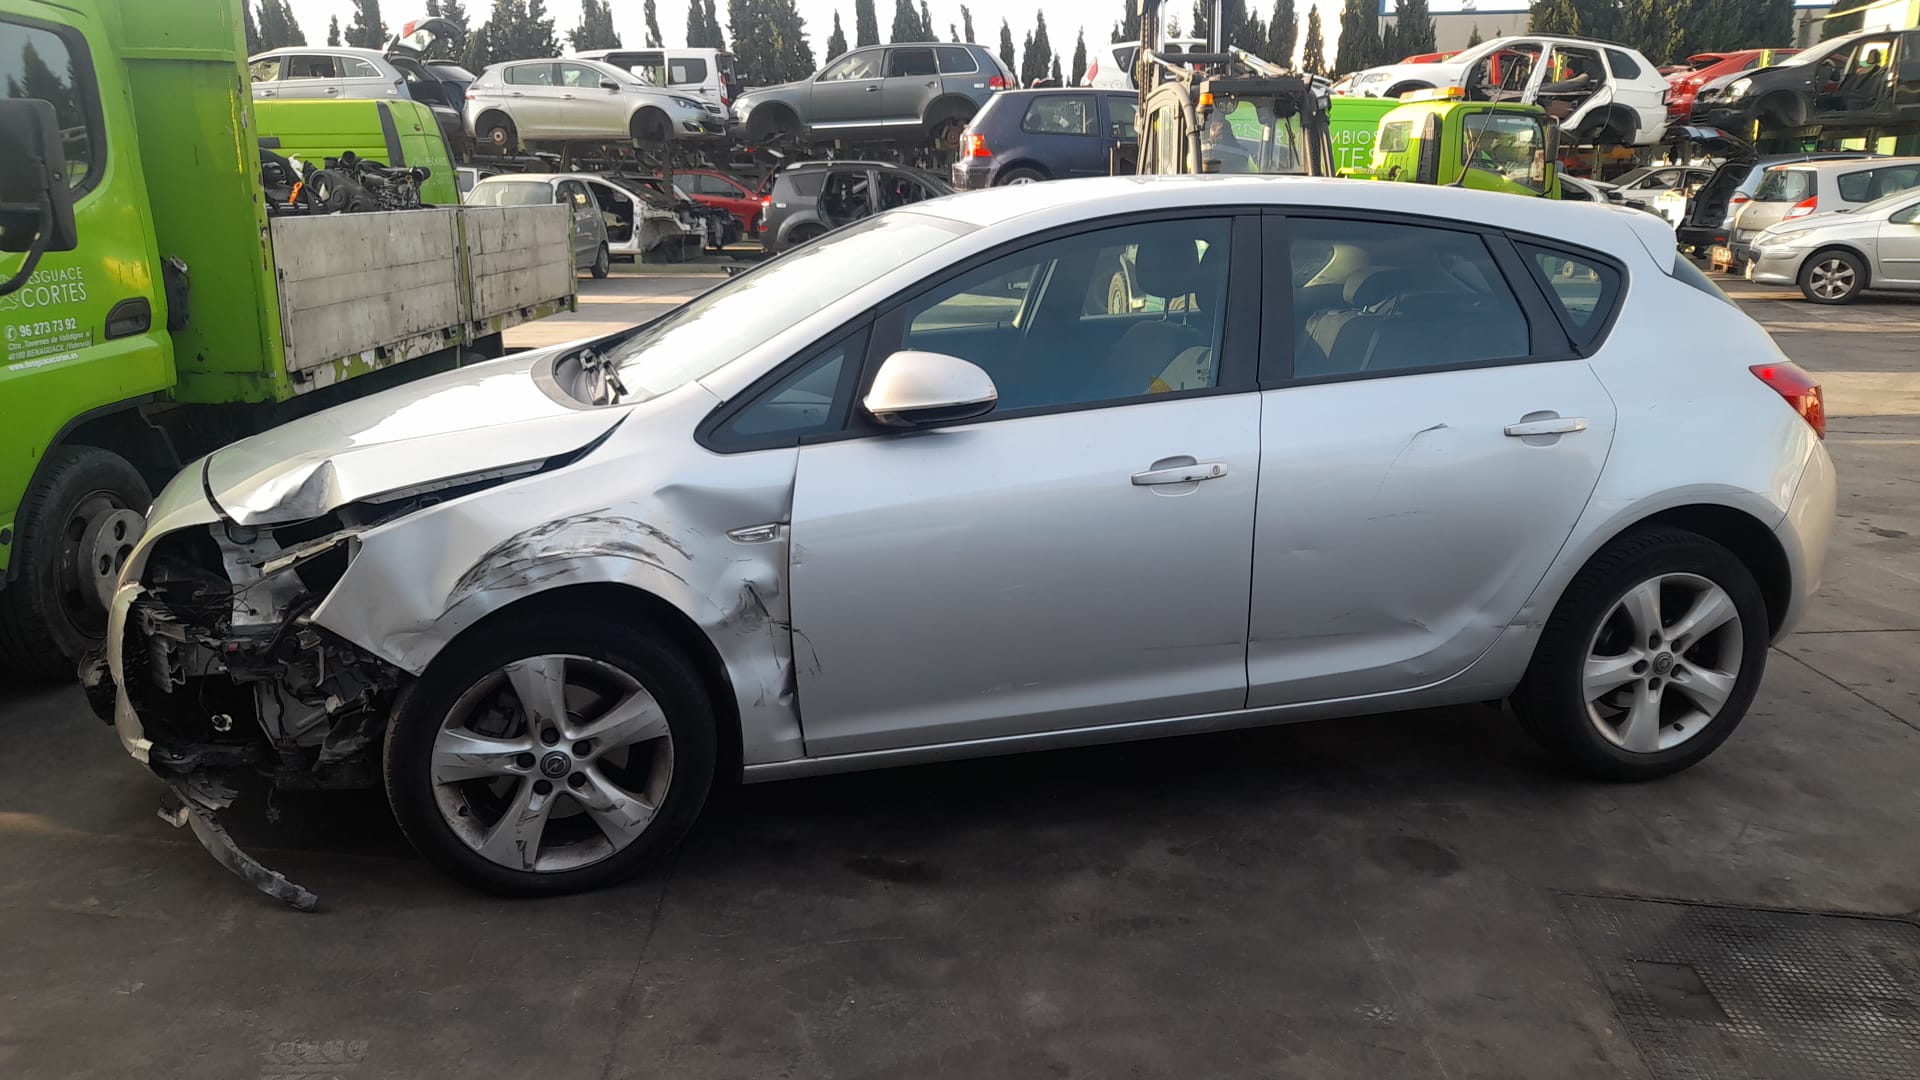 OPEL Astra J (2009-2020) Заден рафт за пакети 2345268, 13292208 20356398